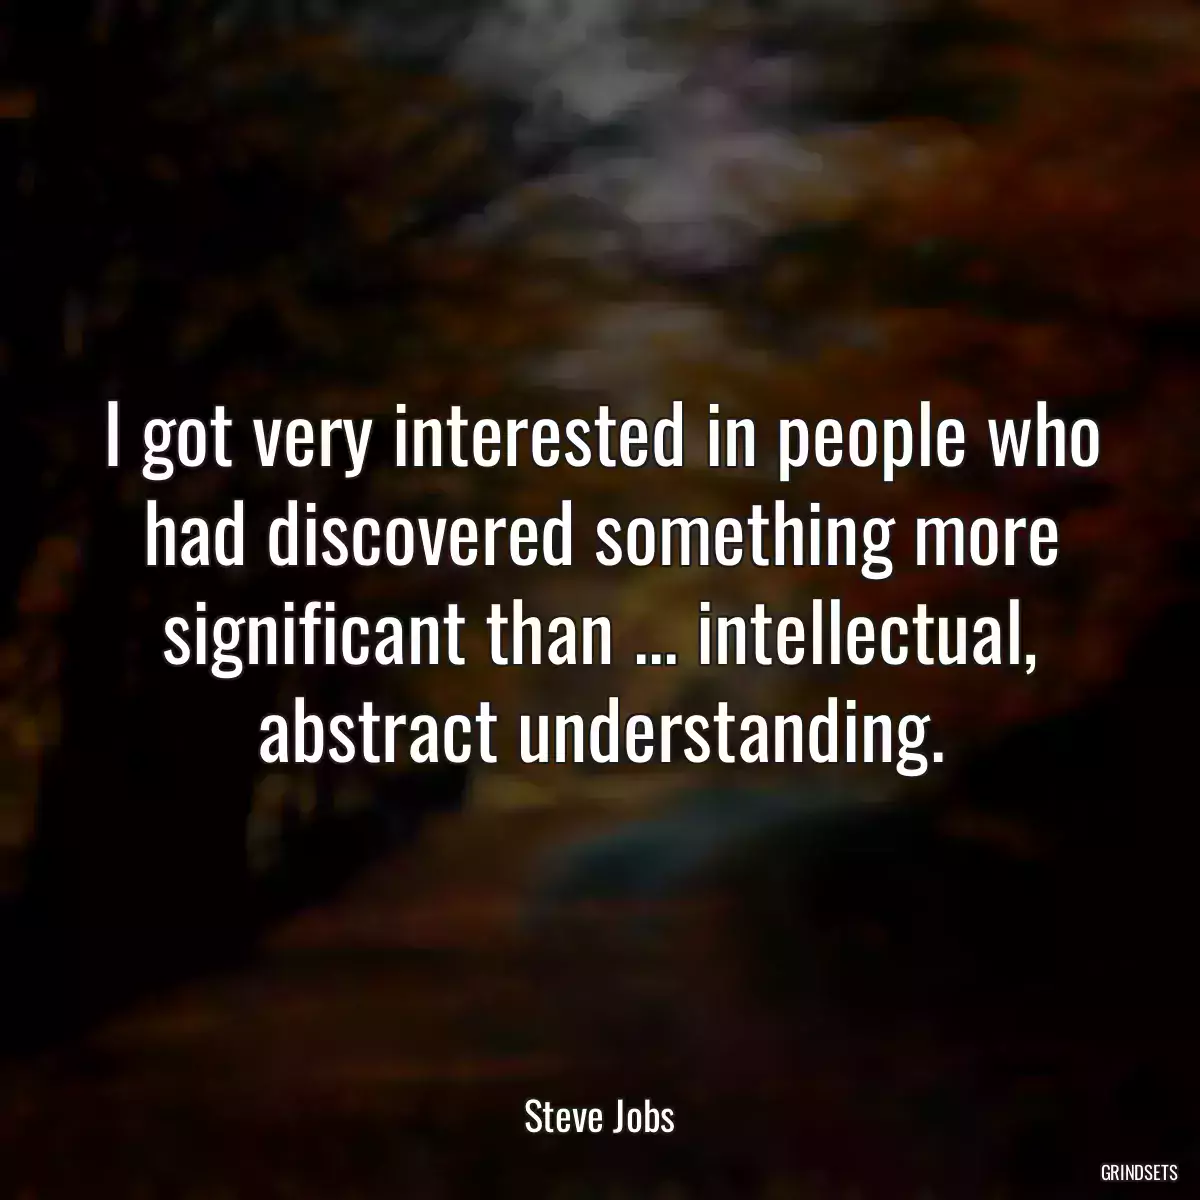 I got very interested in people who had discovered something more significant than ... intellectual, abstract understanding.